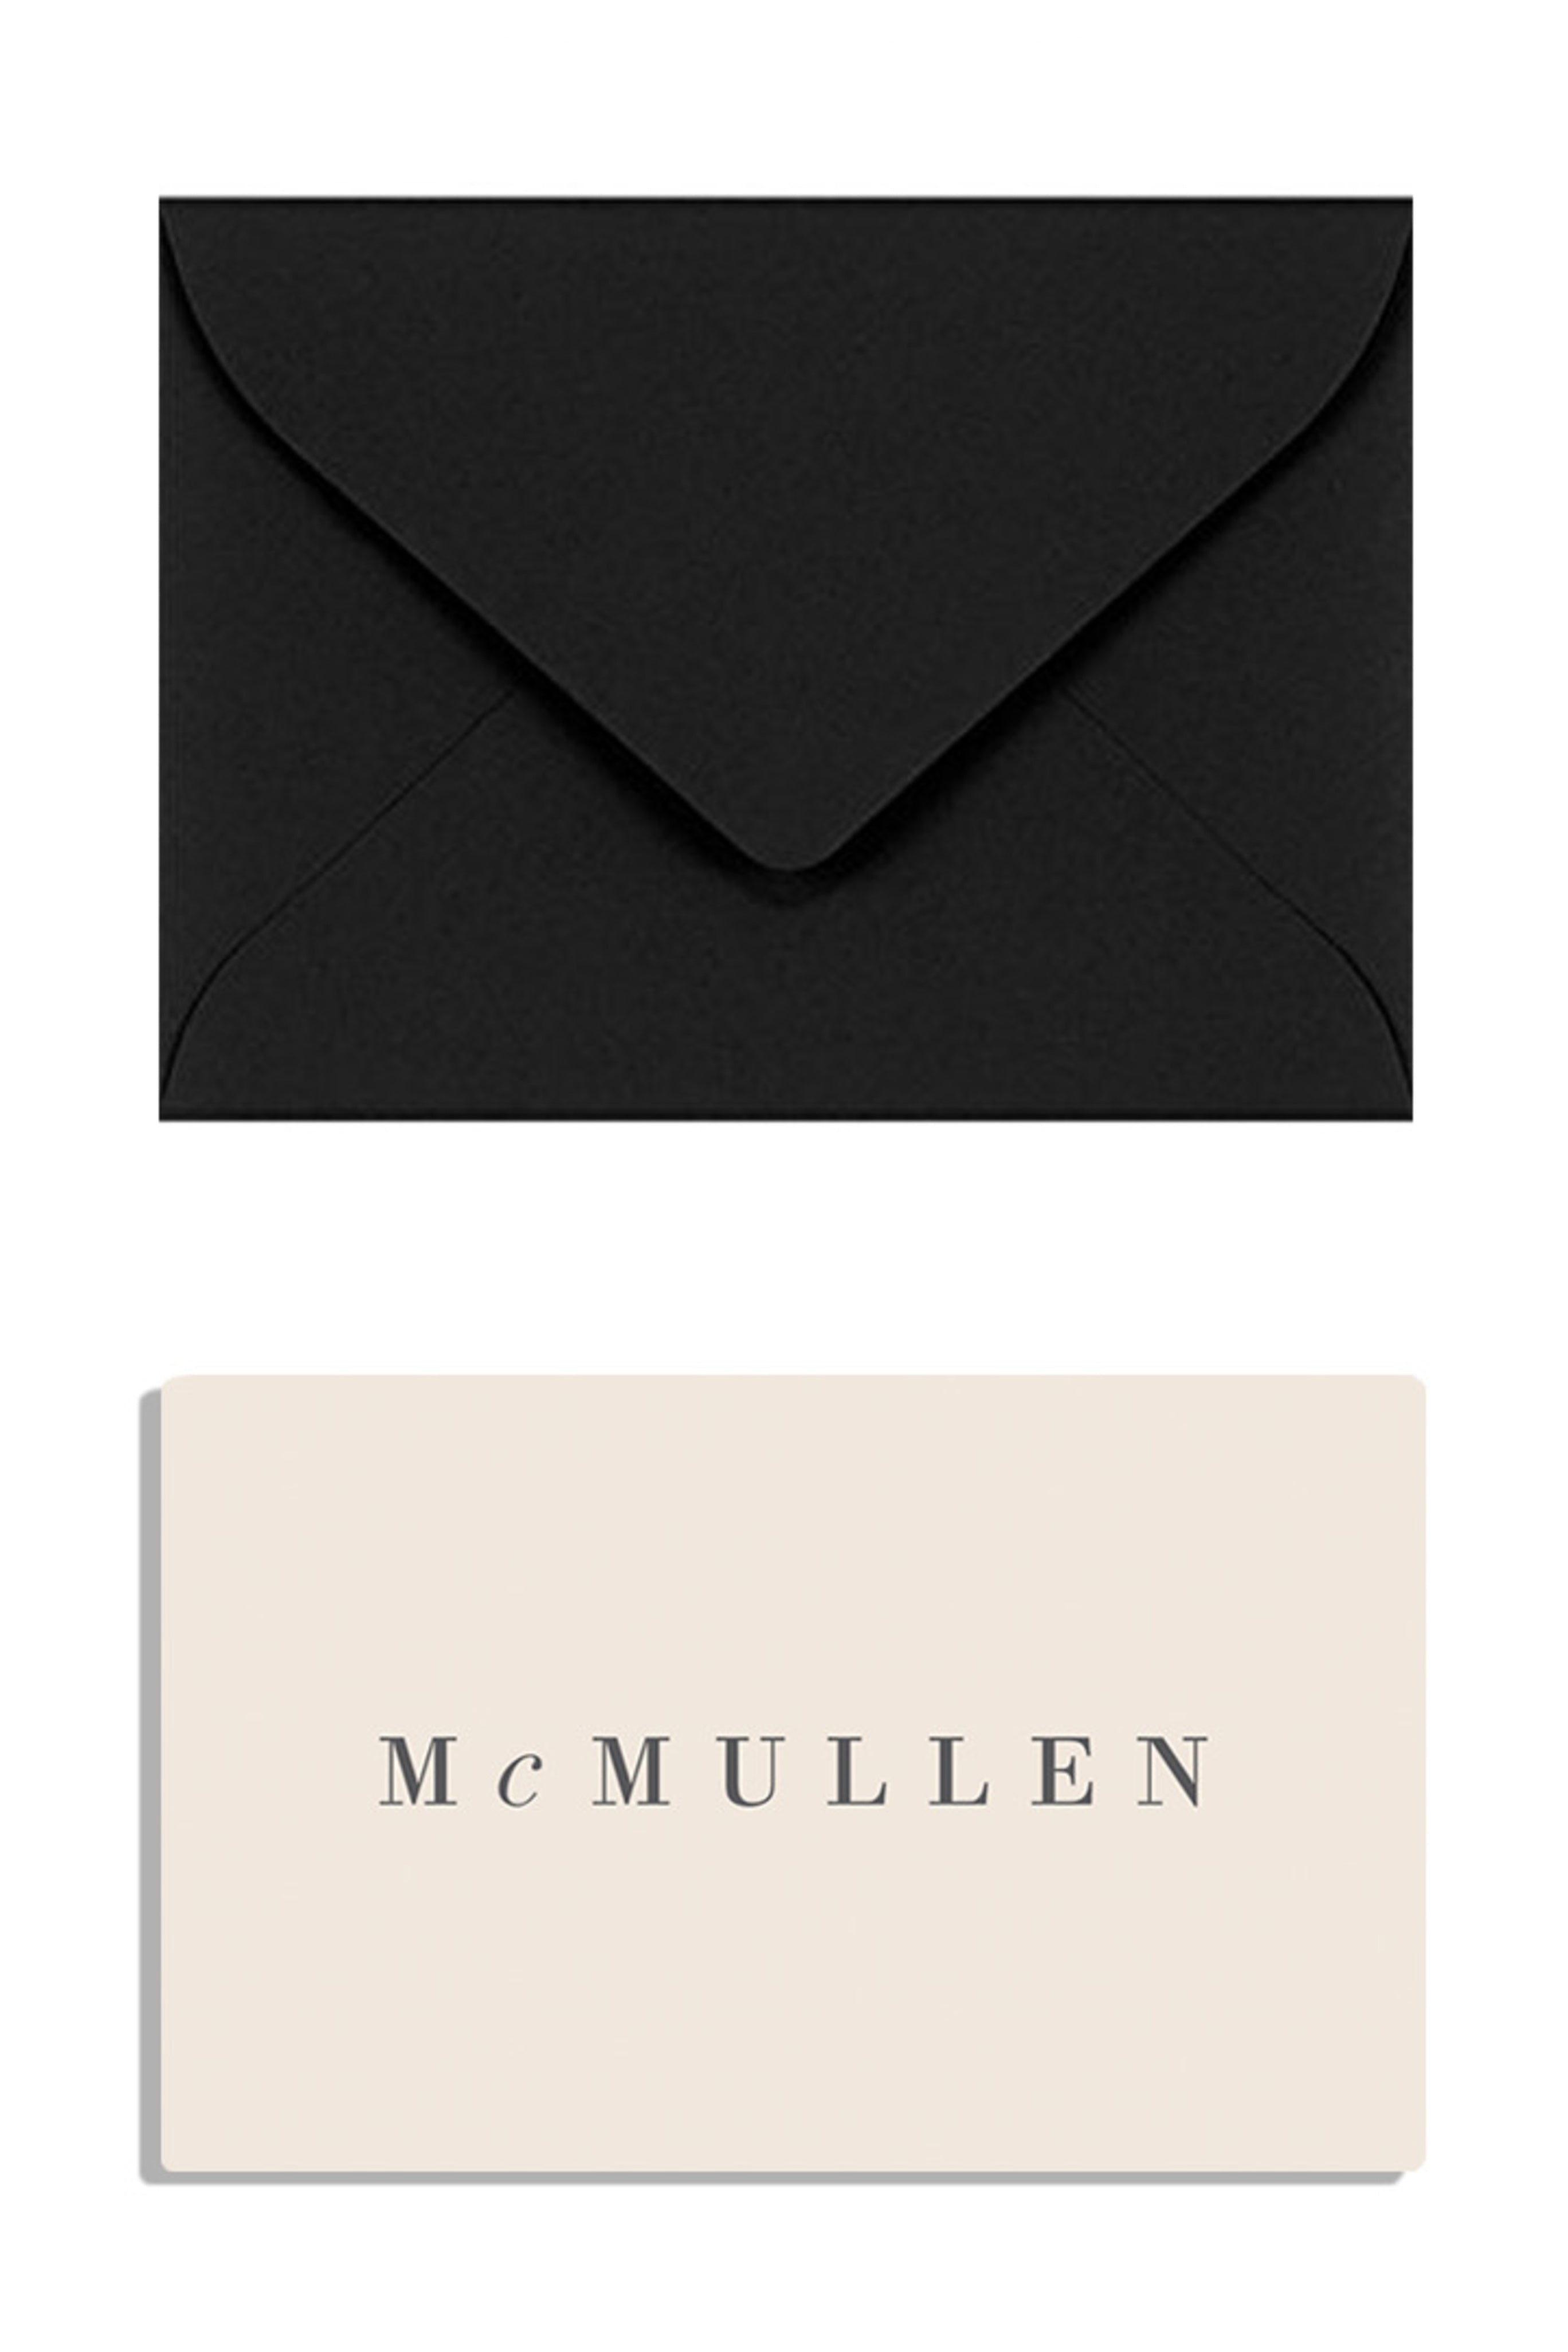 McMullen Gift Card